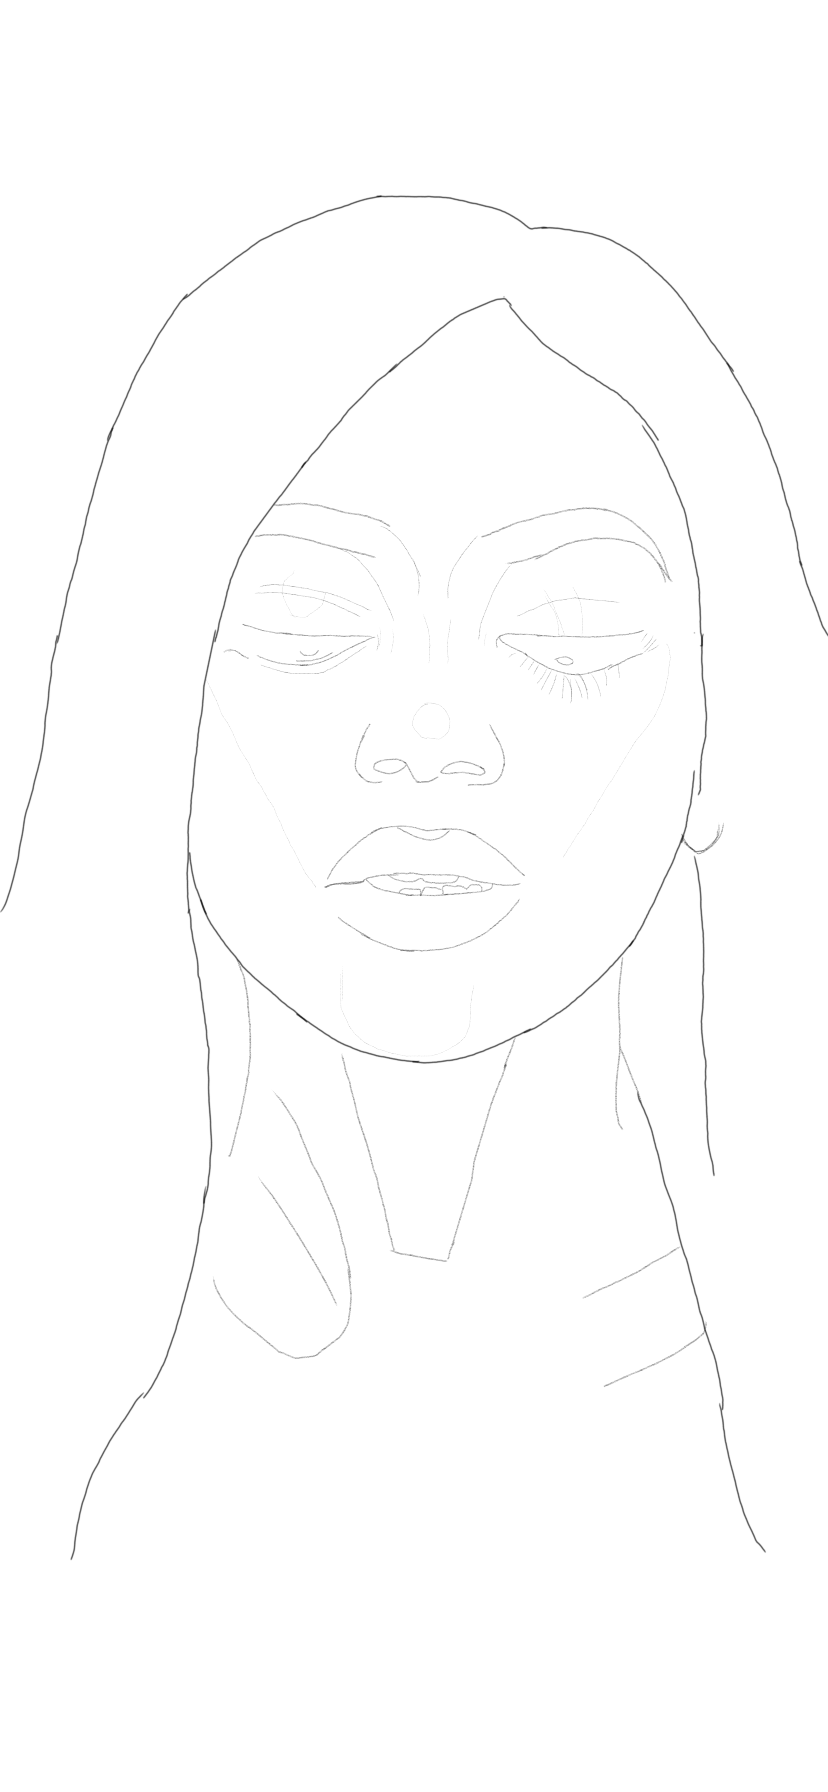 DRAWING OF A WOMAN WITH LONG WEAVON HAIR (AUTODESK SKETCHBOOK) - PALnet